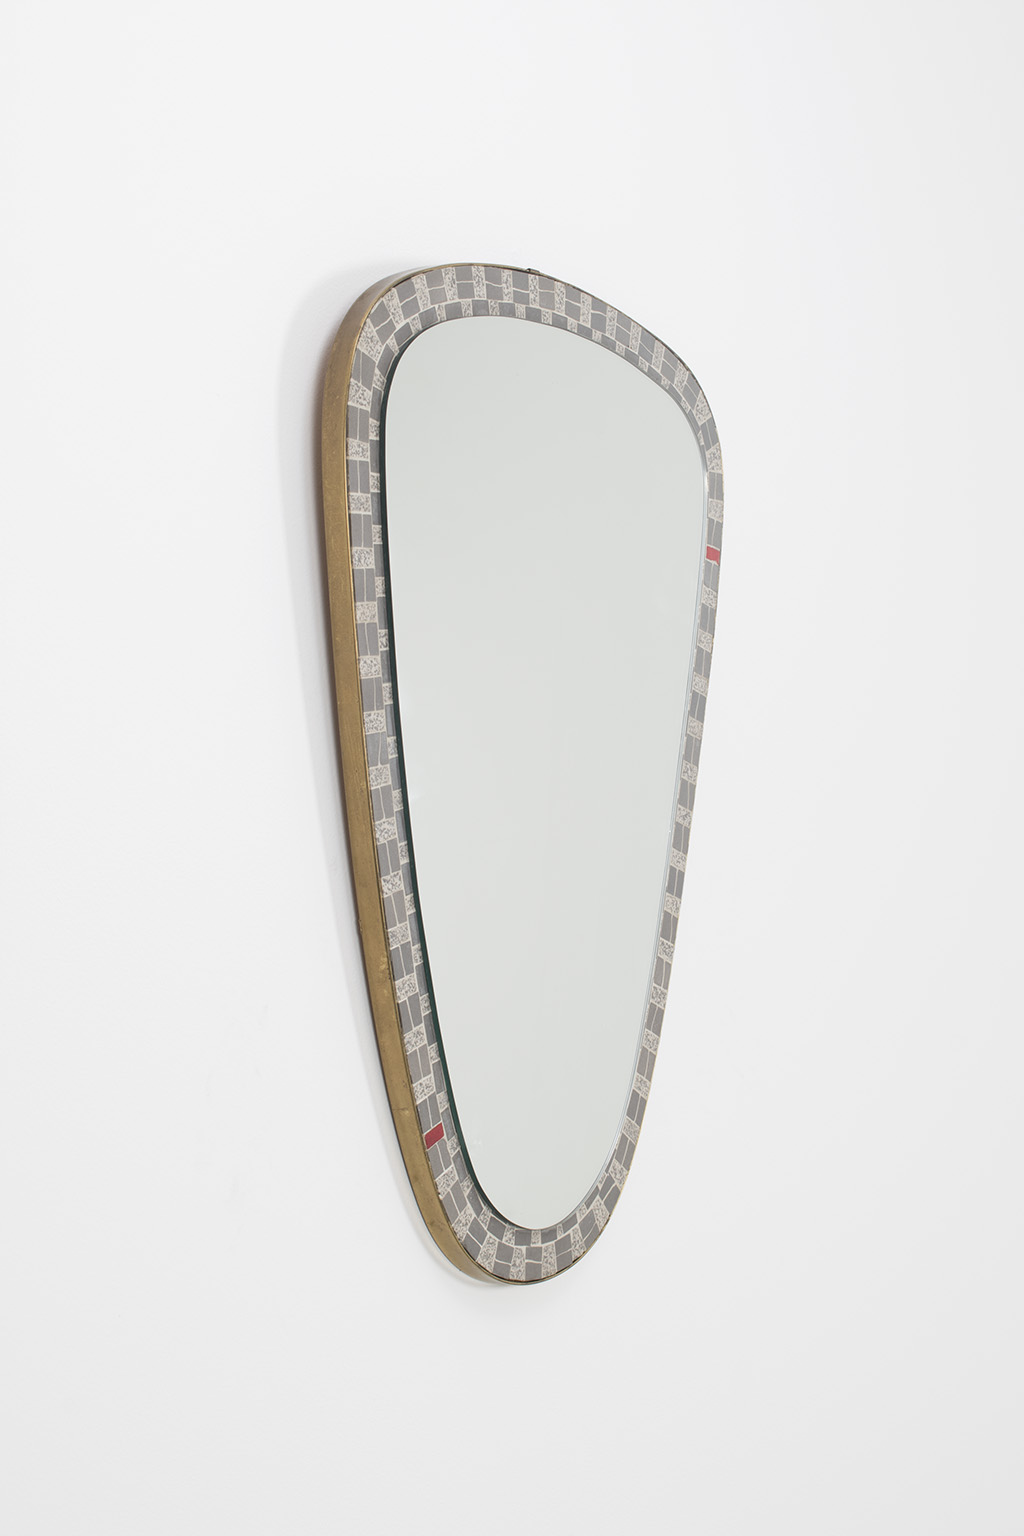 50’s mirror with mosaic